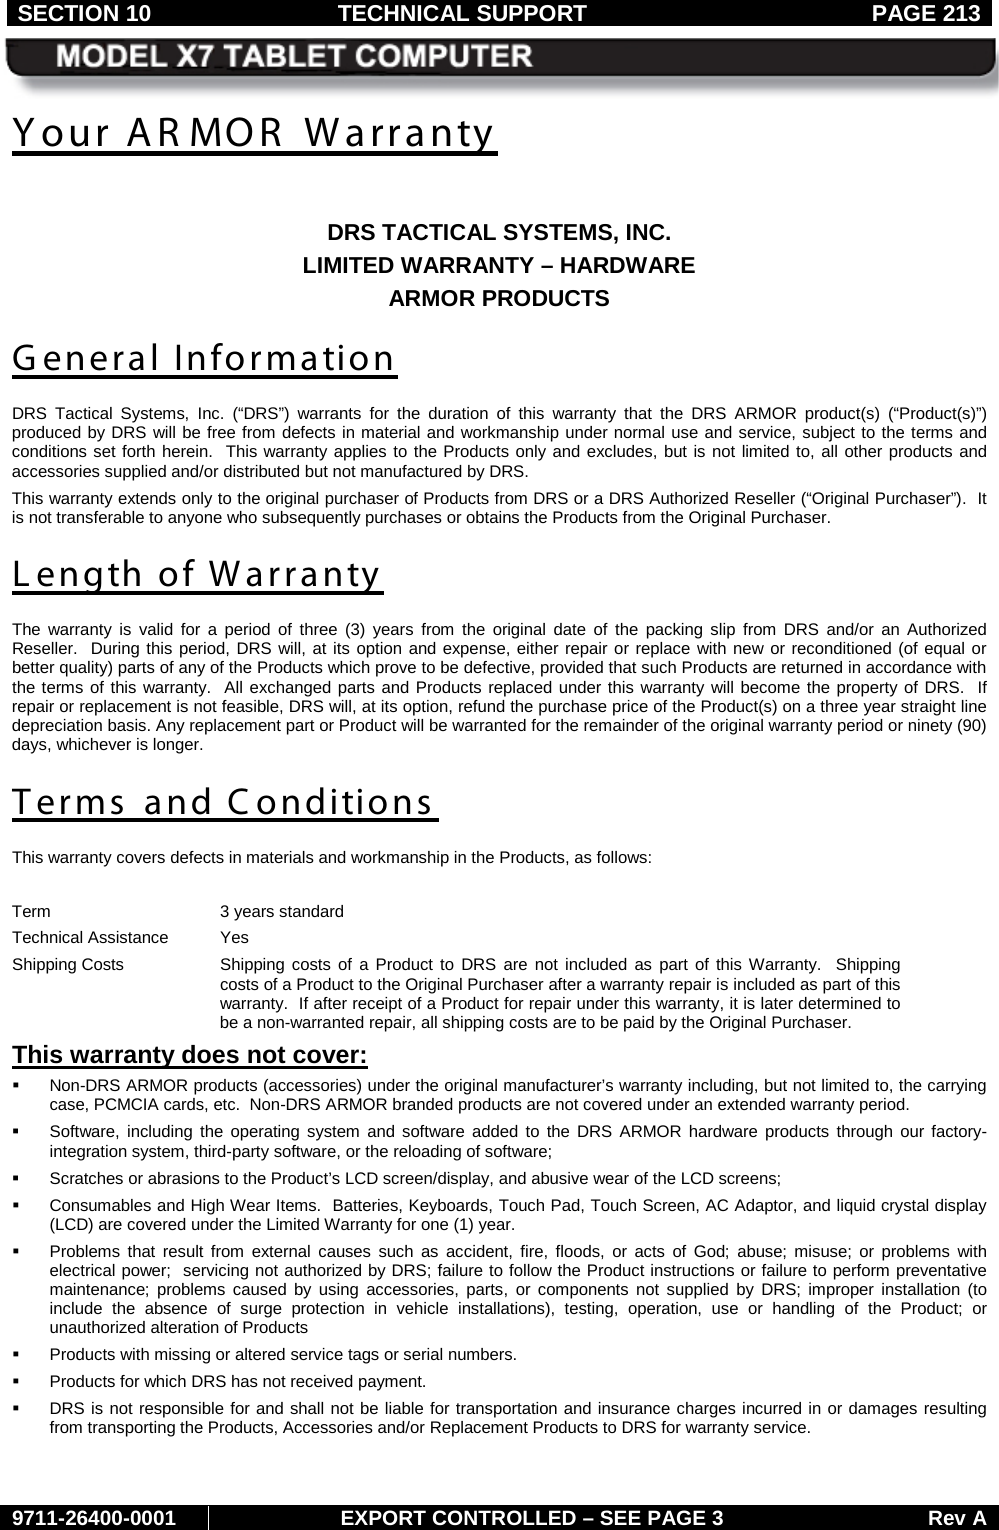 SECTION 10 TECHNICAL SUPPORT  PAGE 213     9711-26400-0001 EXPORT CONTROLLED – SEE PAGE 3 Rev A Your AR MOR  Warranty  DRS TACTICAL SYSTEMS, INC. LIMITED WARRANTY – HARDWARE ARMOR PRODUCTS General Information DRS Tactical Systems, Inc. (“DRS”)  warrants for the duration of this warranty that the  DRS ARMOR product(s)  (“Product(s)”) produced by DRS will be free from defects in material and workmanship under normal use and service, subject to the terms and conditions set forth herein.  This warranty applies to the Products only and excludes, but is not limited to, all other products and accessories supplied and/or distributed but not manufactured by DRS.   This warranty extends only to the original purchaser of Products from DRS or a DRS Authorized Reseller (“Original Purchaser”).  It is not transferable to anyone who subsequently purchases or obtains the Products from the Original Purchaser. Length of Warranty The warranty is valid for a period of three (3) years  from the original date of the packing slip from DRS and/or an Authorized Reseller.  During this period, DRS will, at its option and expense, either repair or replace with new or reconditioned (of equal or better quality) parts of any of the Products which prove to be defective, provided that such Products are returned in accordance with the terms of this warranty.  All exchanged parts and Products replaced under this warranty will become the property of DRS.  If repair or replacement is not feasible, DRS will, at its option, refund the purchase price of the Product(s) on a three year straight line depreciation basis. Any replacement part or Product will be warranted for the remainder of the original warranty period or ninety (90) days, whichever is longer. Terms and Conditions This warranty covers defects in materials and workmanship in the Products, as follows:  Term 3 years standard Technical Assistance Yes Shipping Costs Shipping costs of a Product to DRS are not included as part of this Warranty.  Shipping costs of a Product to the Original Purchaser after a warranty repair is included as part of this warranty.  If after receipt of a Product for repair under this warranty, it is later determined to be a non-warranted repair, all shipping costs are to be paid by the Original Purchaser. This warranty does not cover:   Non-DRS ARMOR products (accessories) under the original manufacturer’s warranty including, but not limited to, the carrying case, PCMCIA cards, etc.  Non-DRS ARMOR branded products are not covered under an extended warranty period.  Software, including the operating system and software added to the DRS ARMOR hardware products through our factory-integration system, third-party software, or the reloading of software;  Scratches or abrasions to the Product’s LCD screen/display, and abusive wear of the LCD screens;  Consumables and High Wear Items.  Batteries, Keyboards, Touch Pad, Touch Screen, AC Adaptor, and liquid crystal display (LCD) are covered under the Limited Warranty for one (1) year.   Problems that result from external causes such as accident, fire, floods, or acts of God; abuse; misuse; or problems with electrical power;  servicing not authorized by DRS; failure to follow the Product instructions or failure to perform preventative maintenance; problems caused by using accessories, parts, or components not supplied by DRS; improper installation (to include the absence of surge protection in vehicle installations), testing, operation, use or handling of the Product; or unauthorized alteration of Products  Products with missing or altered service tags or serial numbers.  Products for which DRS has not received payment.  DRS is not responsible for and shall not be liable for transportation and insurance charges incurred in or damages resulting from transporting the Products, Accessories and/or Replacement Products to DRS for warranty service. 